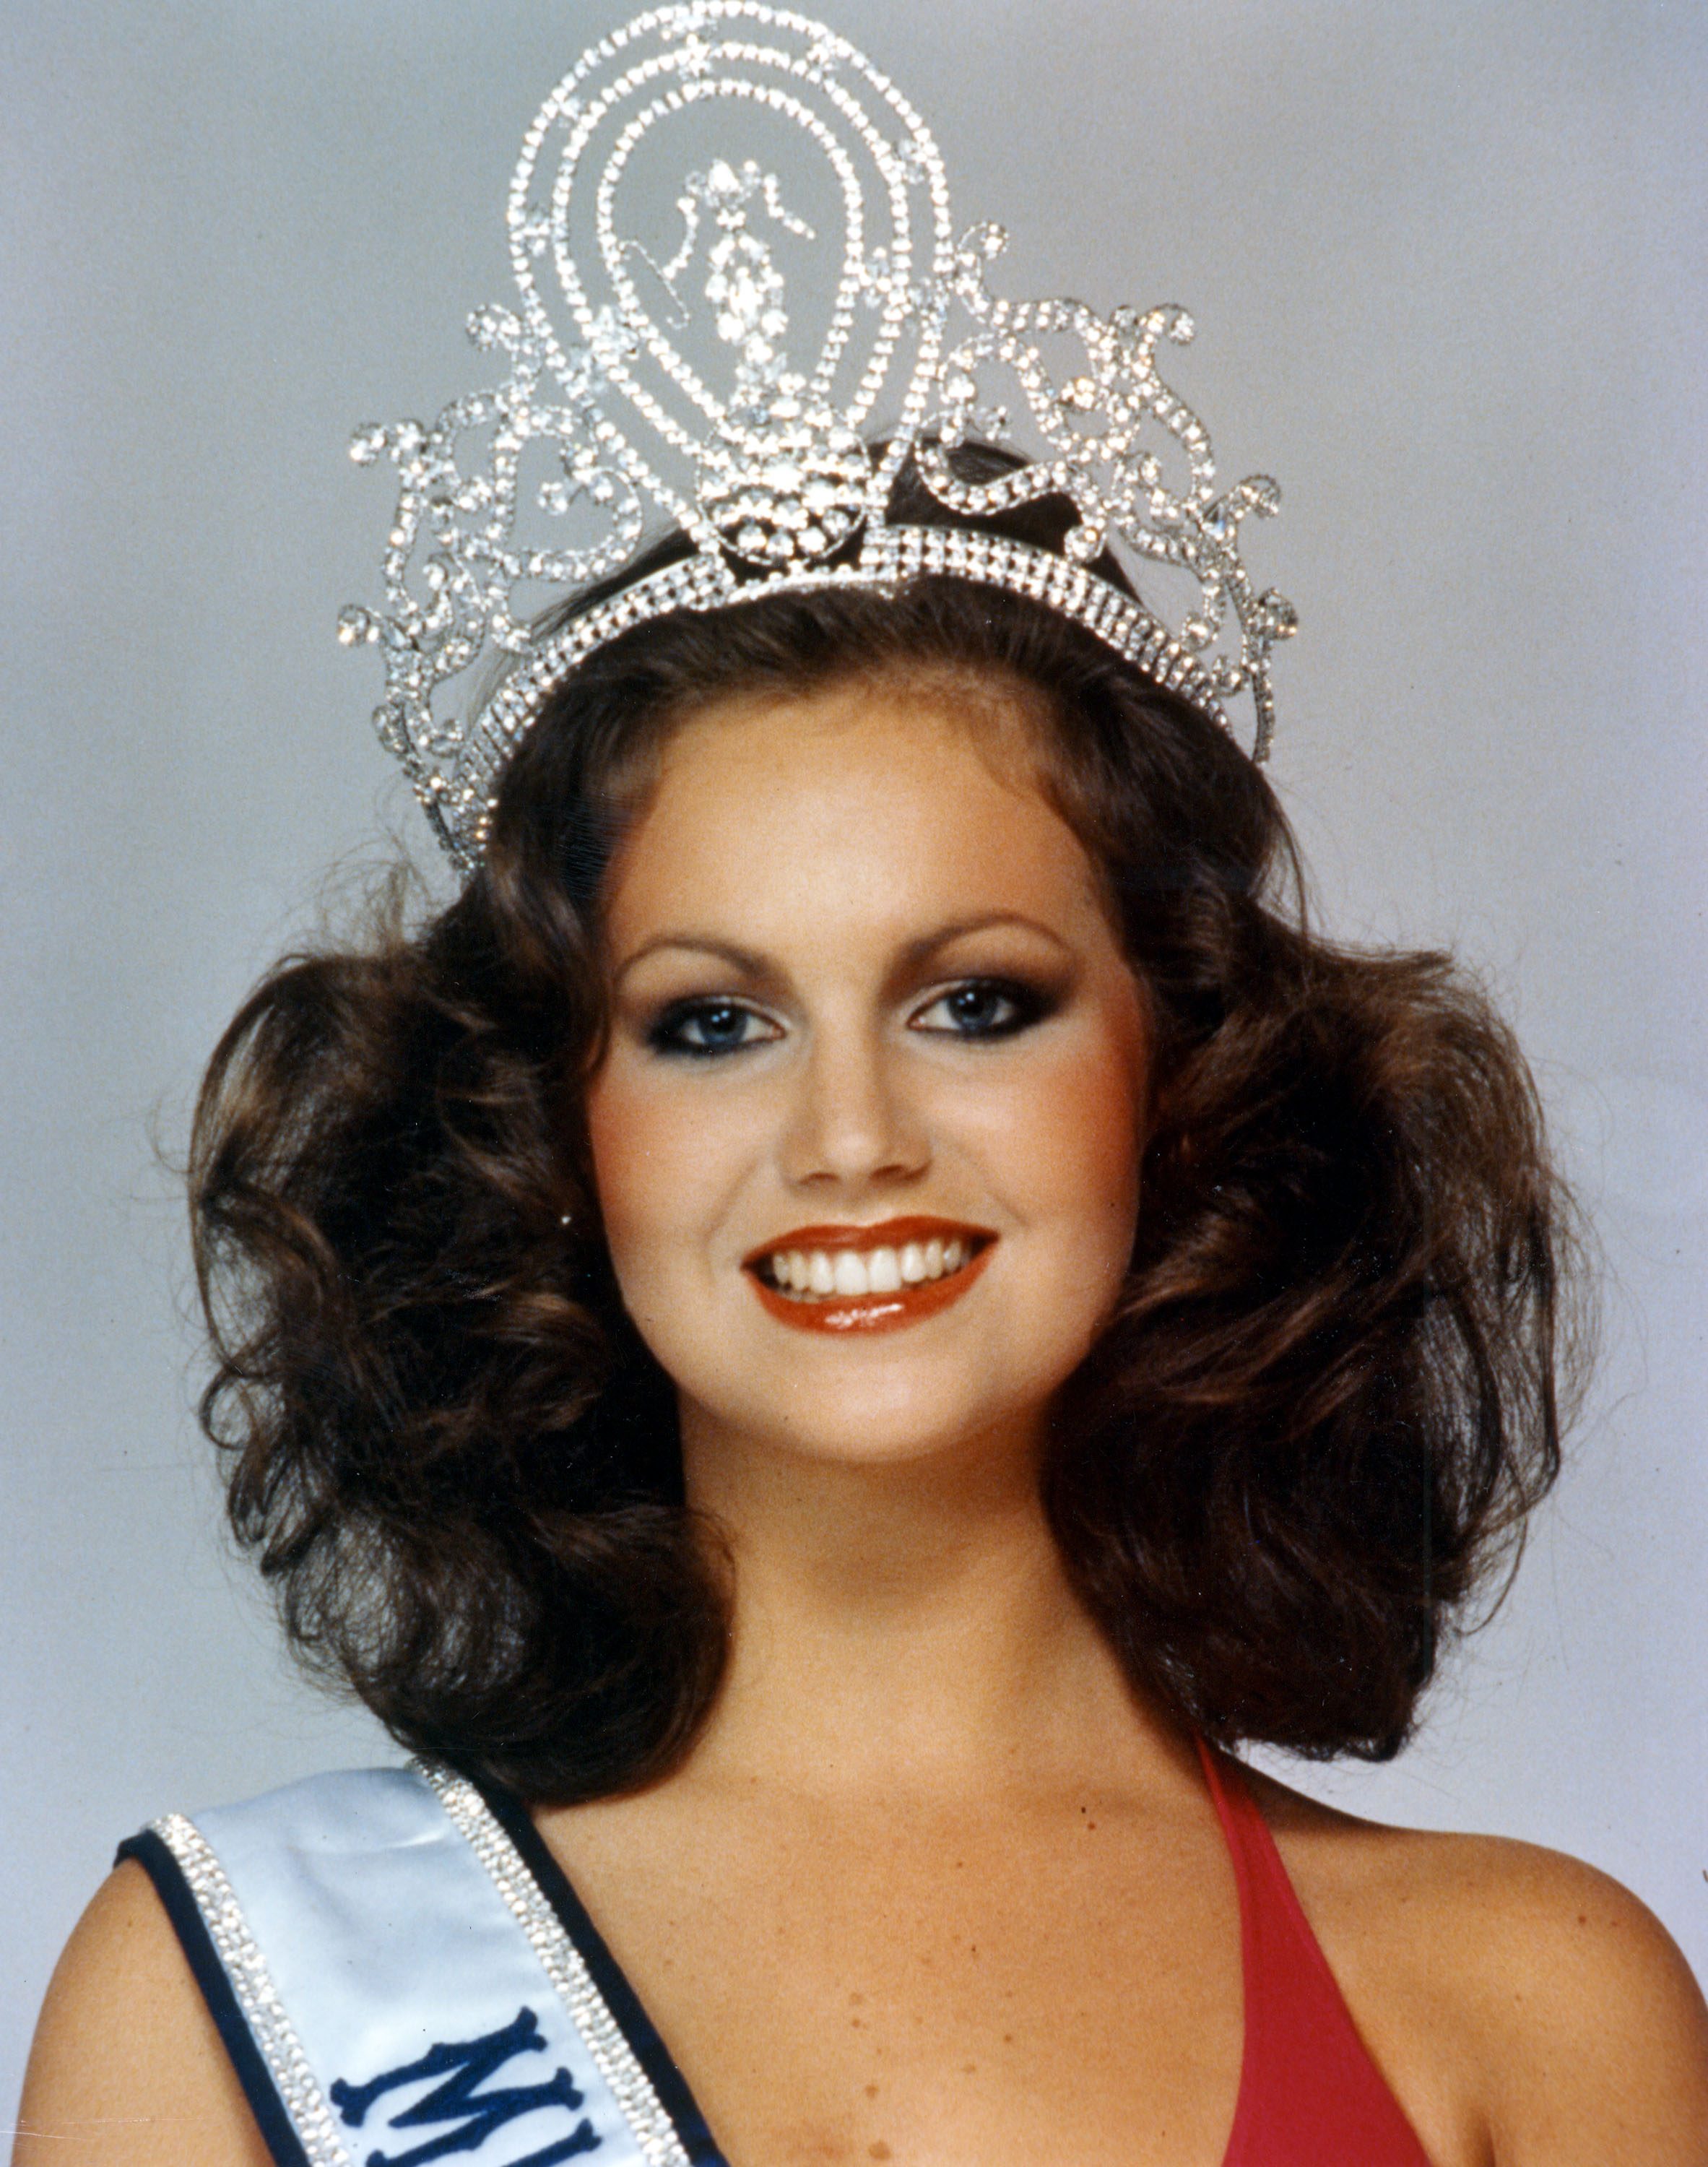 MISS UNIVERSE 1978. Margaret Gardiner, from South Africa, was a 19-year-old model when she won the crown. 